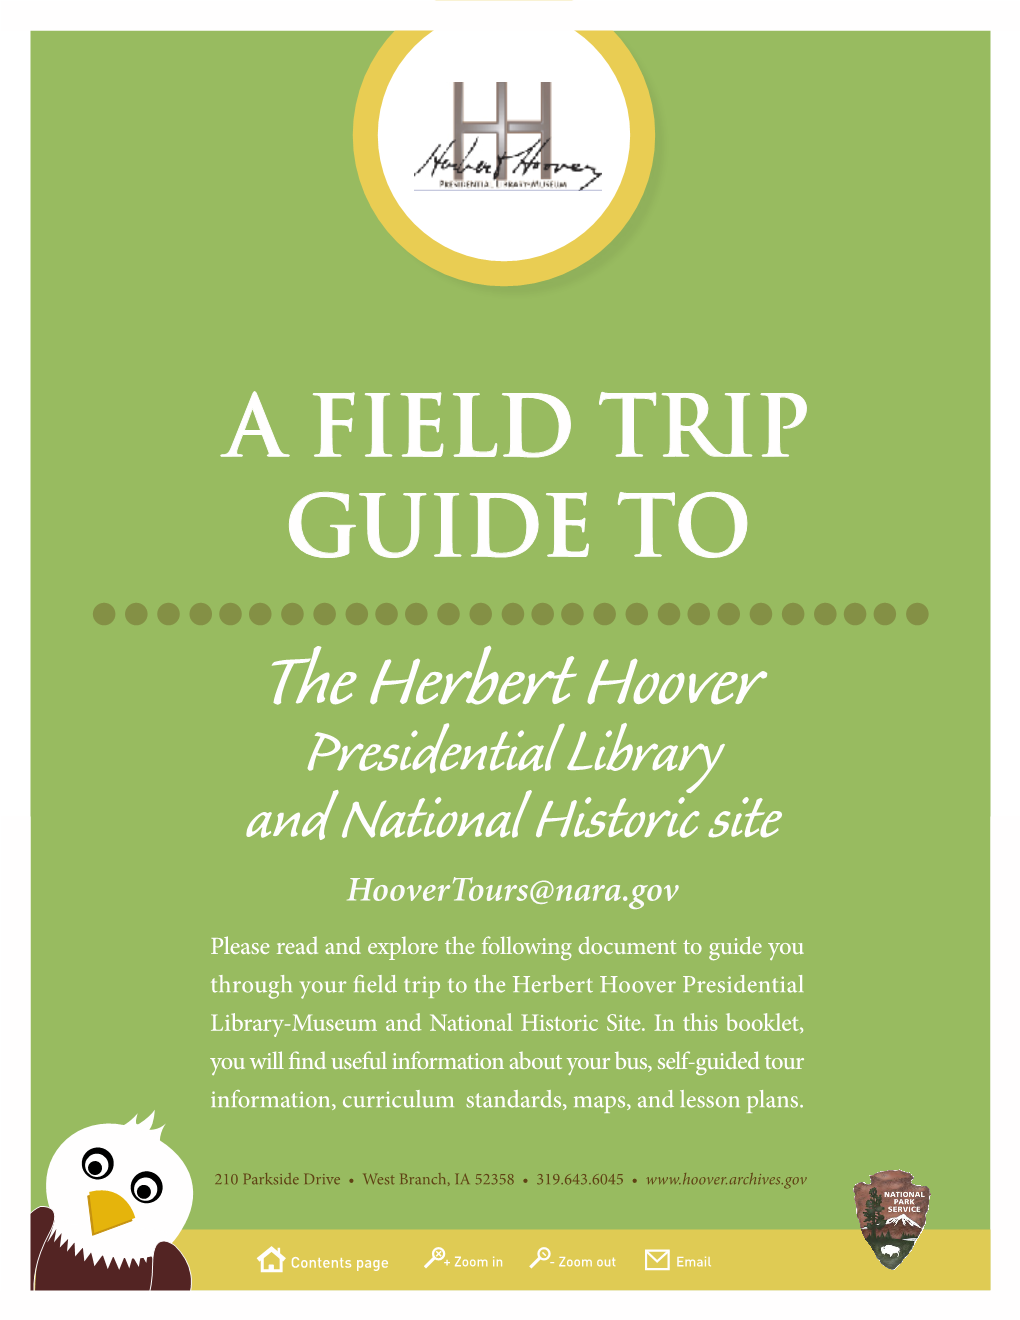 A Field Trip Guide to the Herbert Hoover Library and National Historic Site